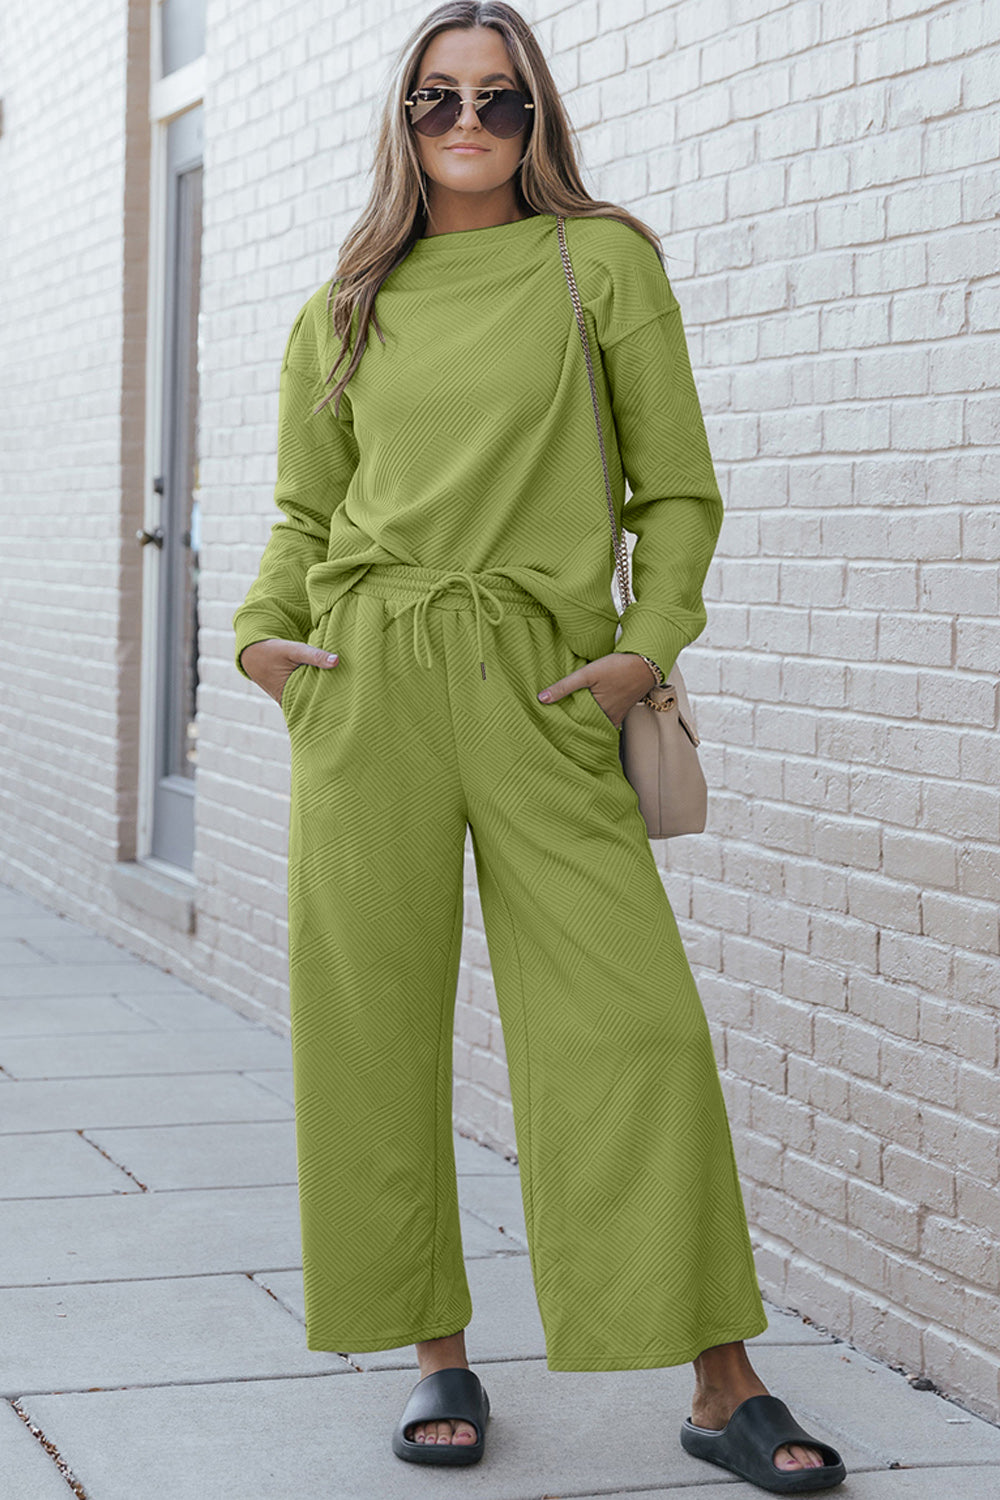 Double Take Full Size Textured Long Sleeve Top and Drawstring Pants Set Chartreuse S 